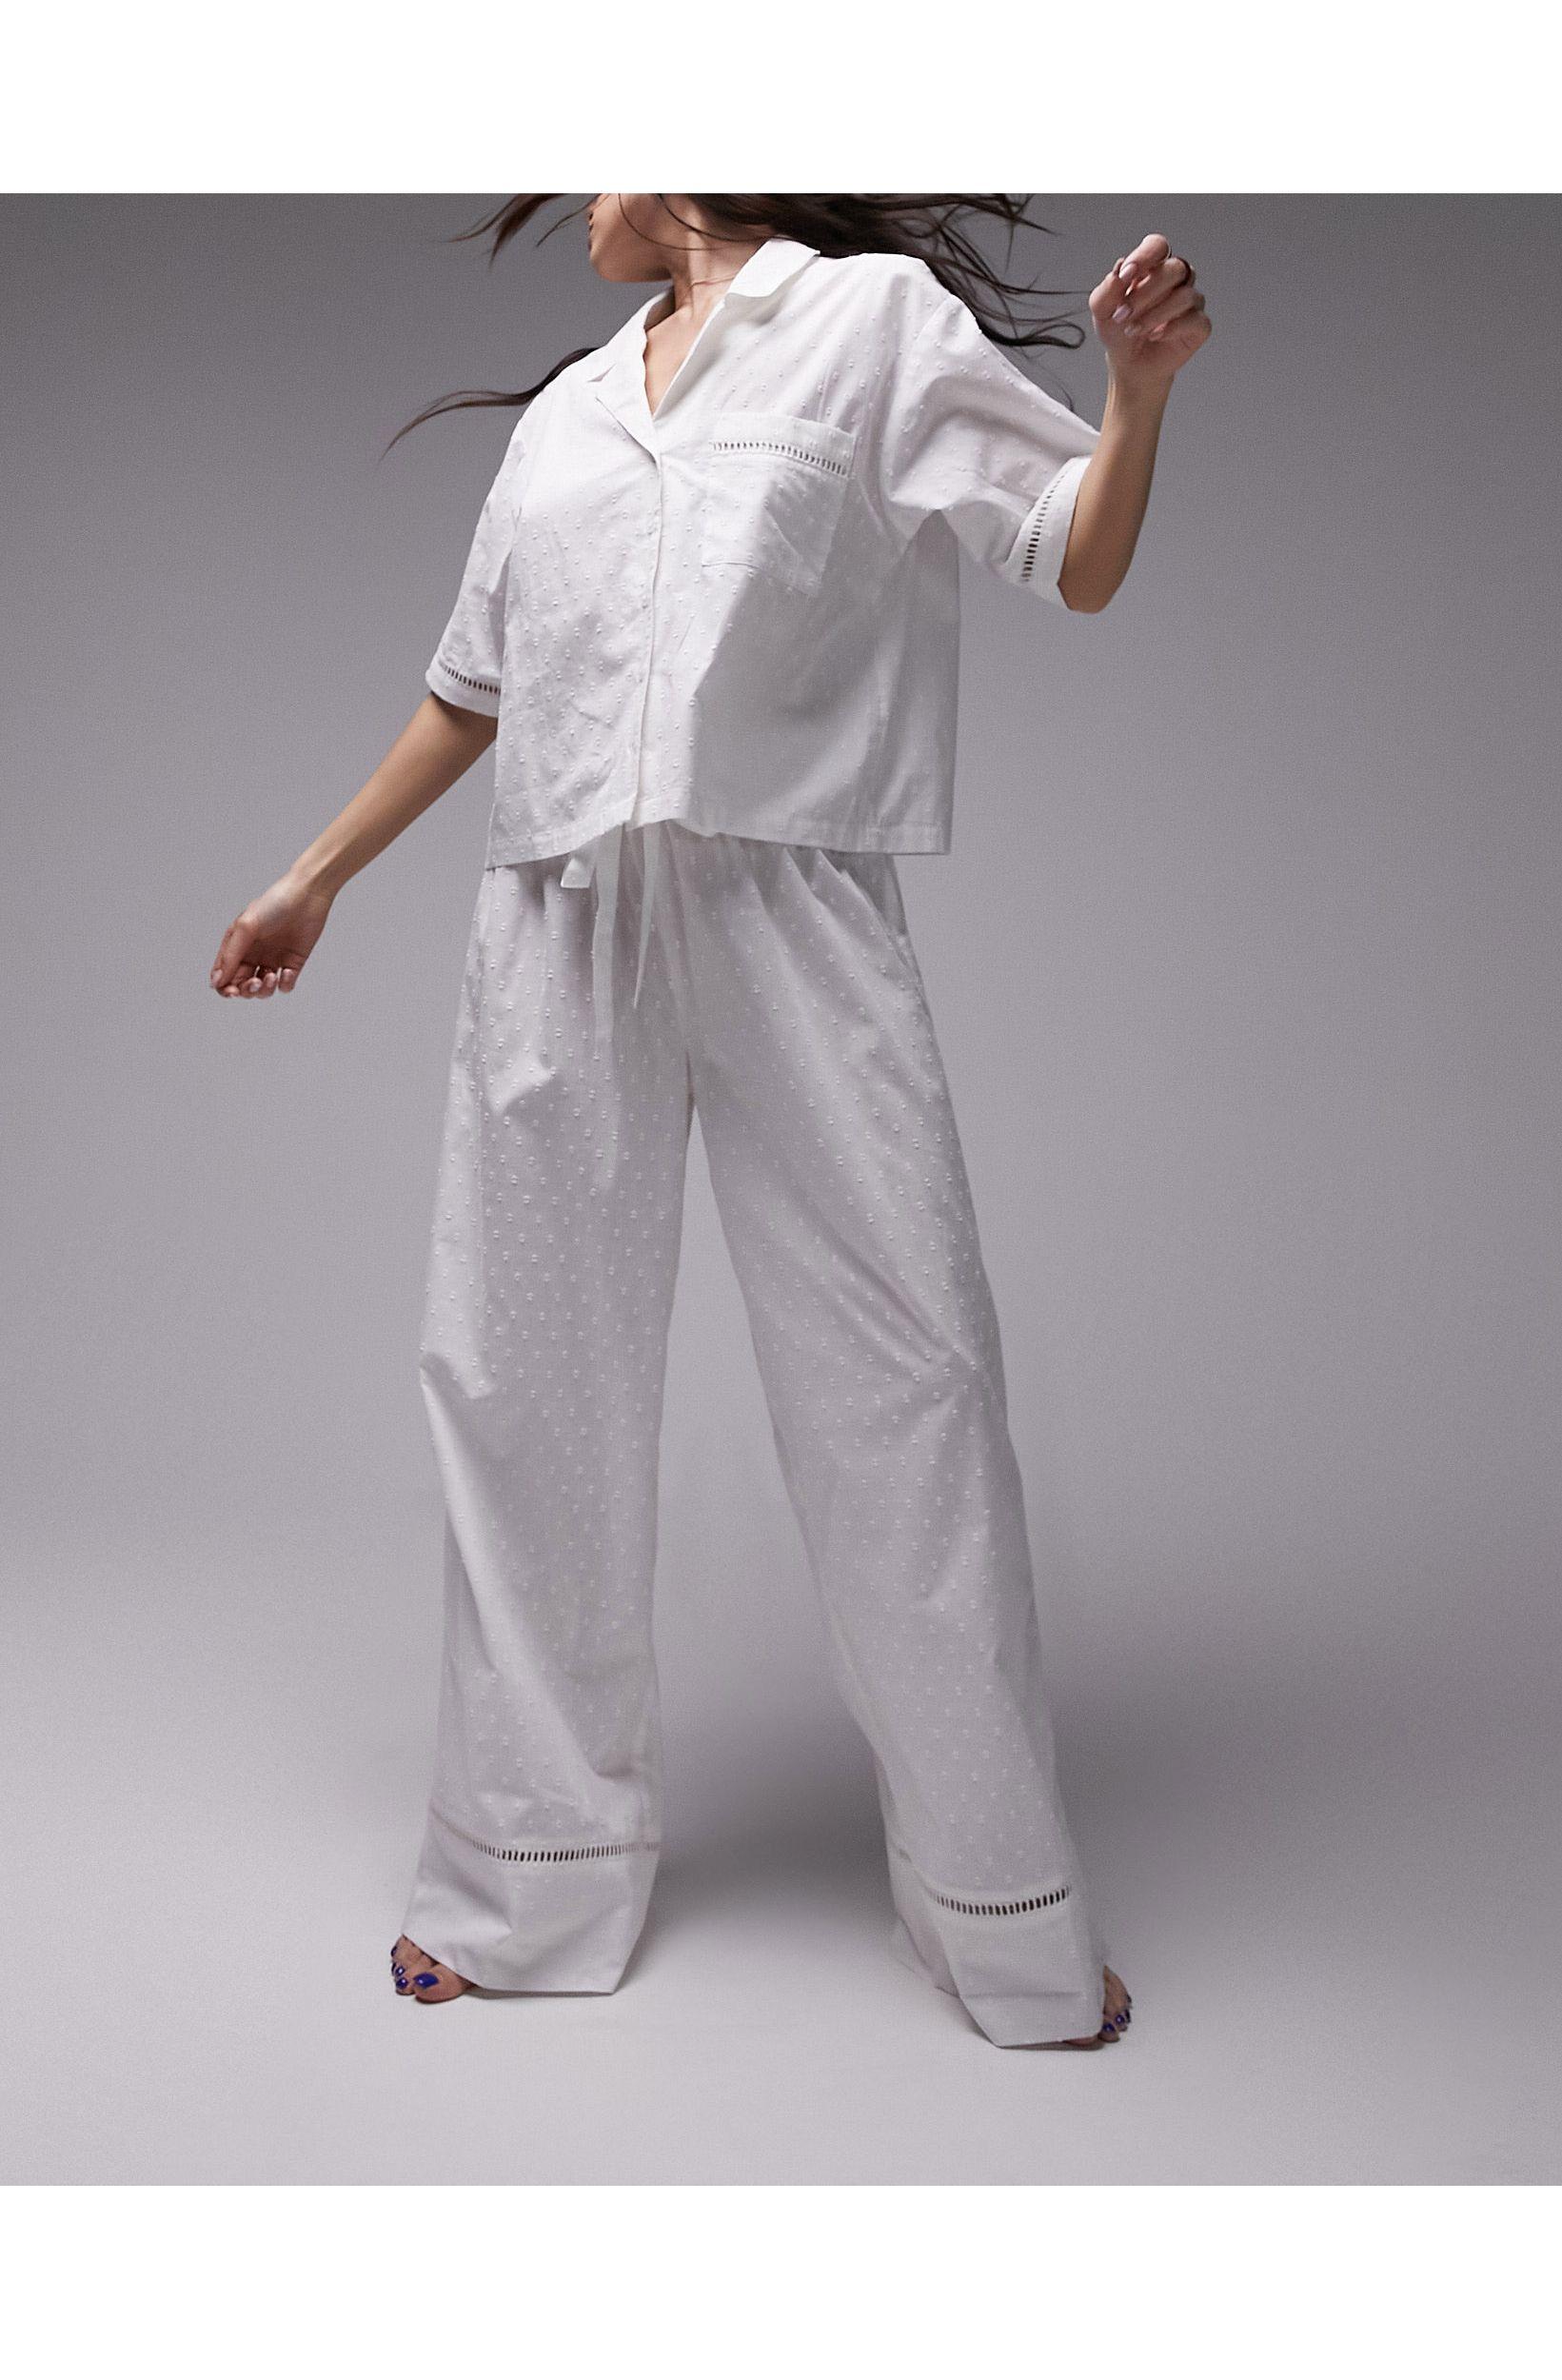 TOPSHOP Textured Cotton Shirt And Pants Pajama Set in White | Lyst